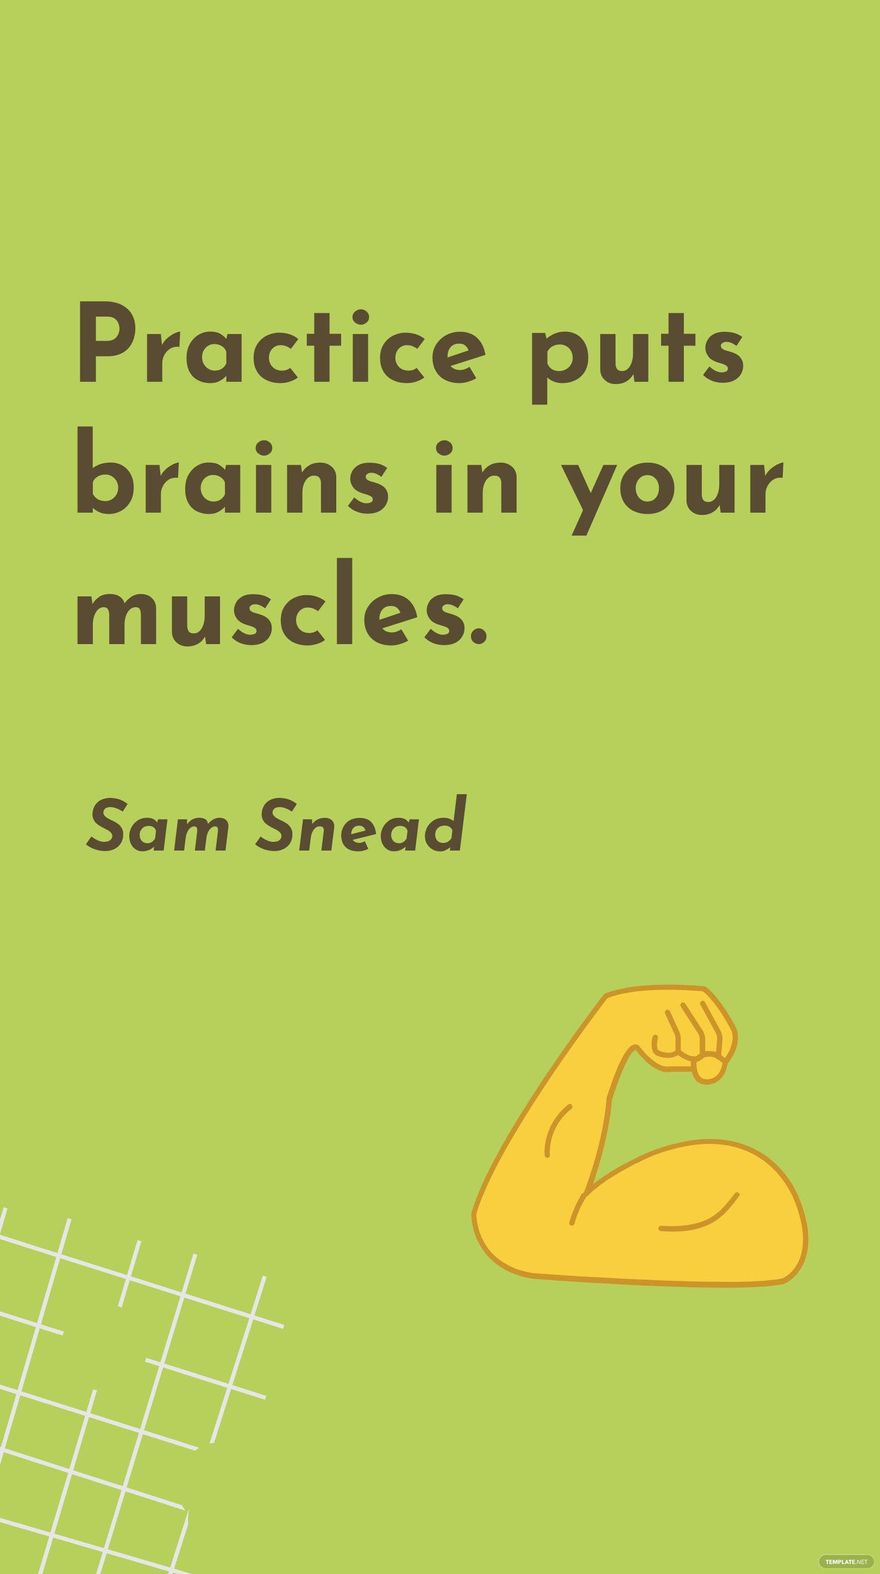 Sam Snead - Practice puts brains in your muscles.